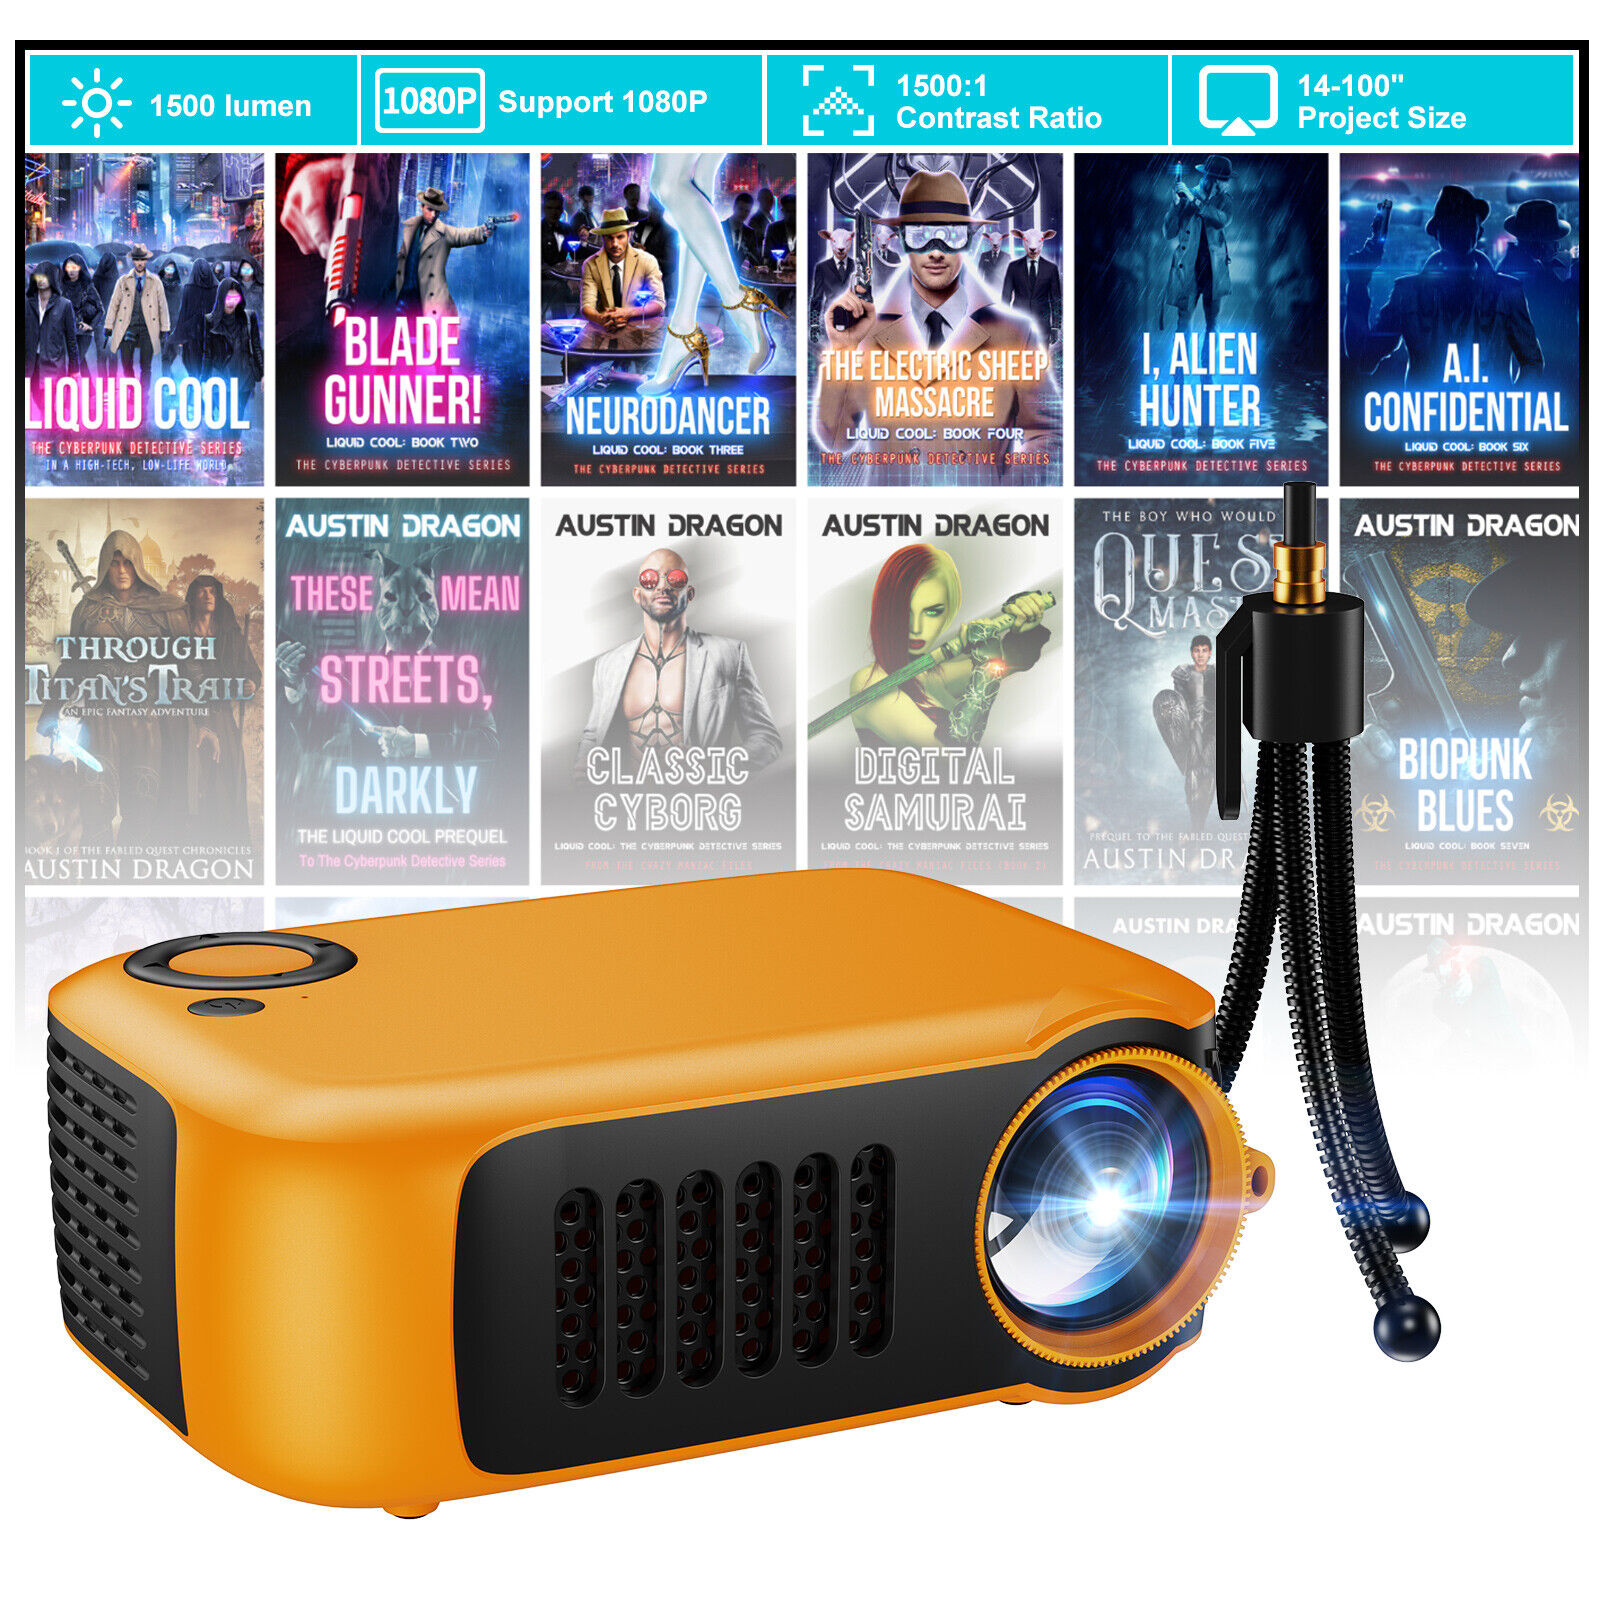 Portable Projector 1500 Lumen Mini 1080P LED Cell Phone With USB Laptop Beamer